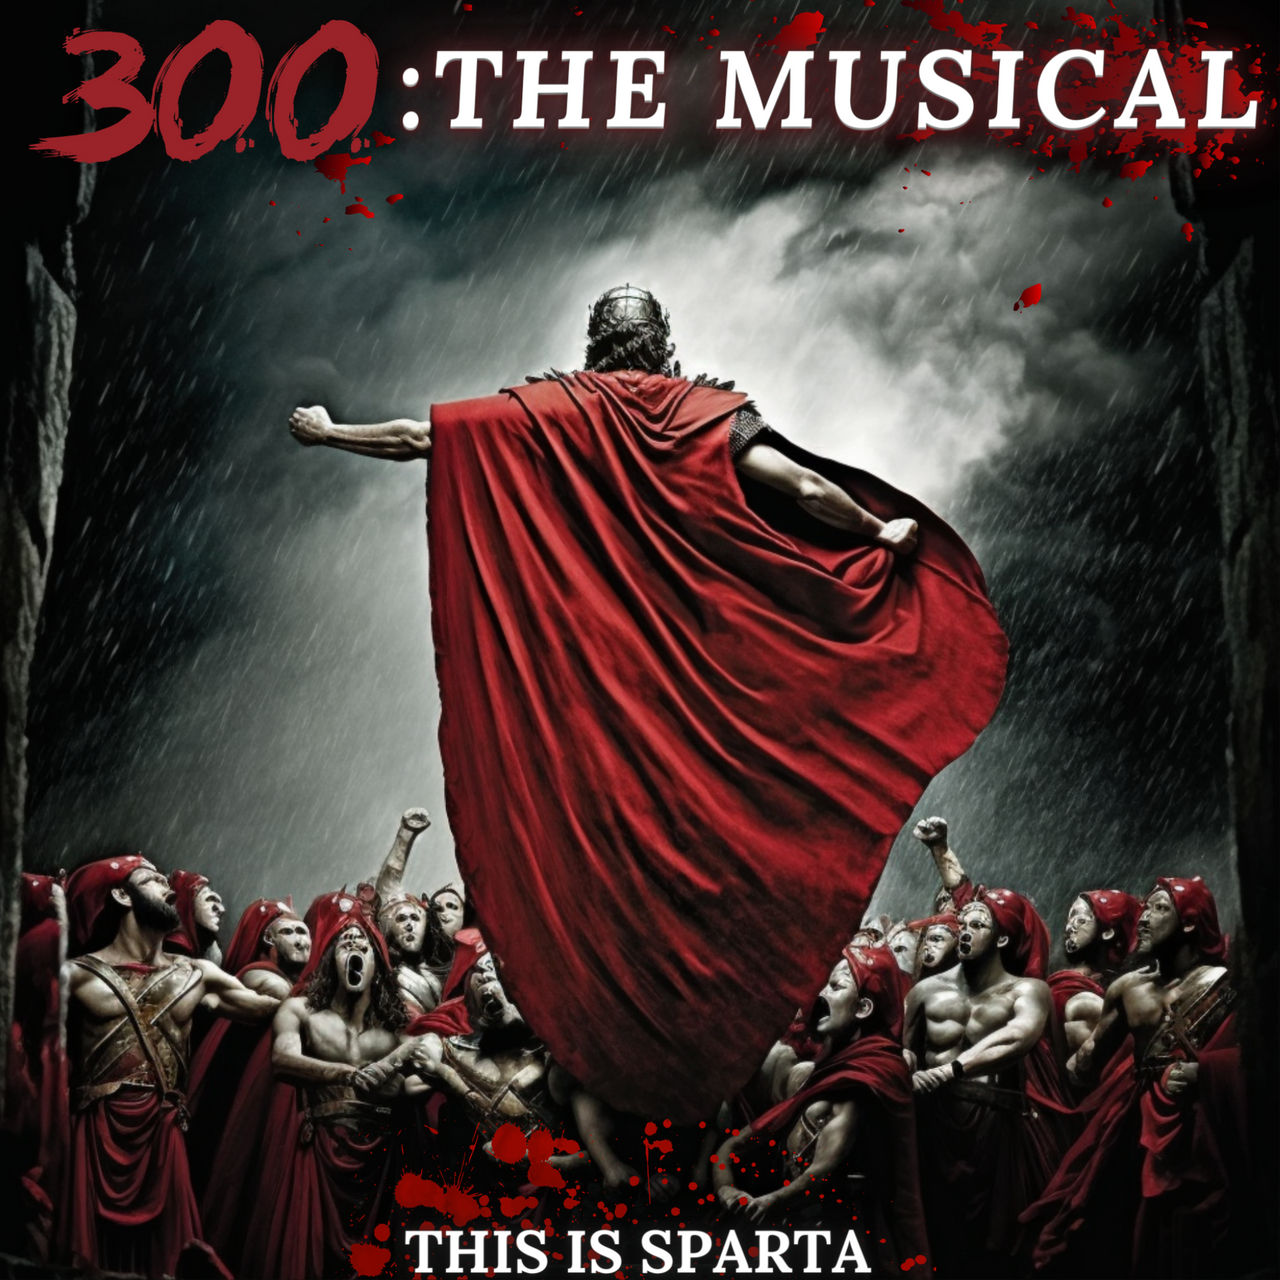 This is Sparta - 300: The Musical by Robbcore on DeviantArt